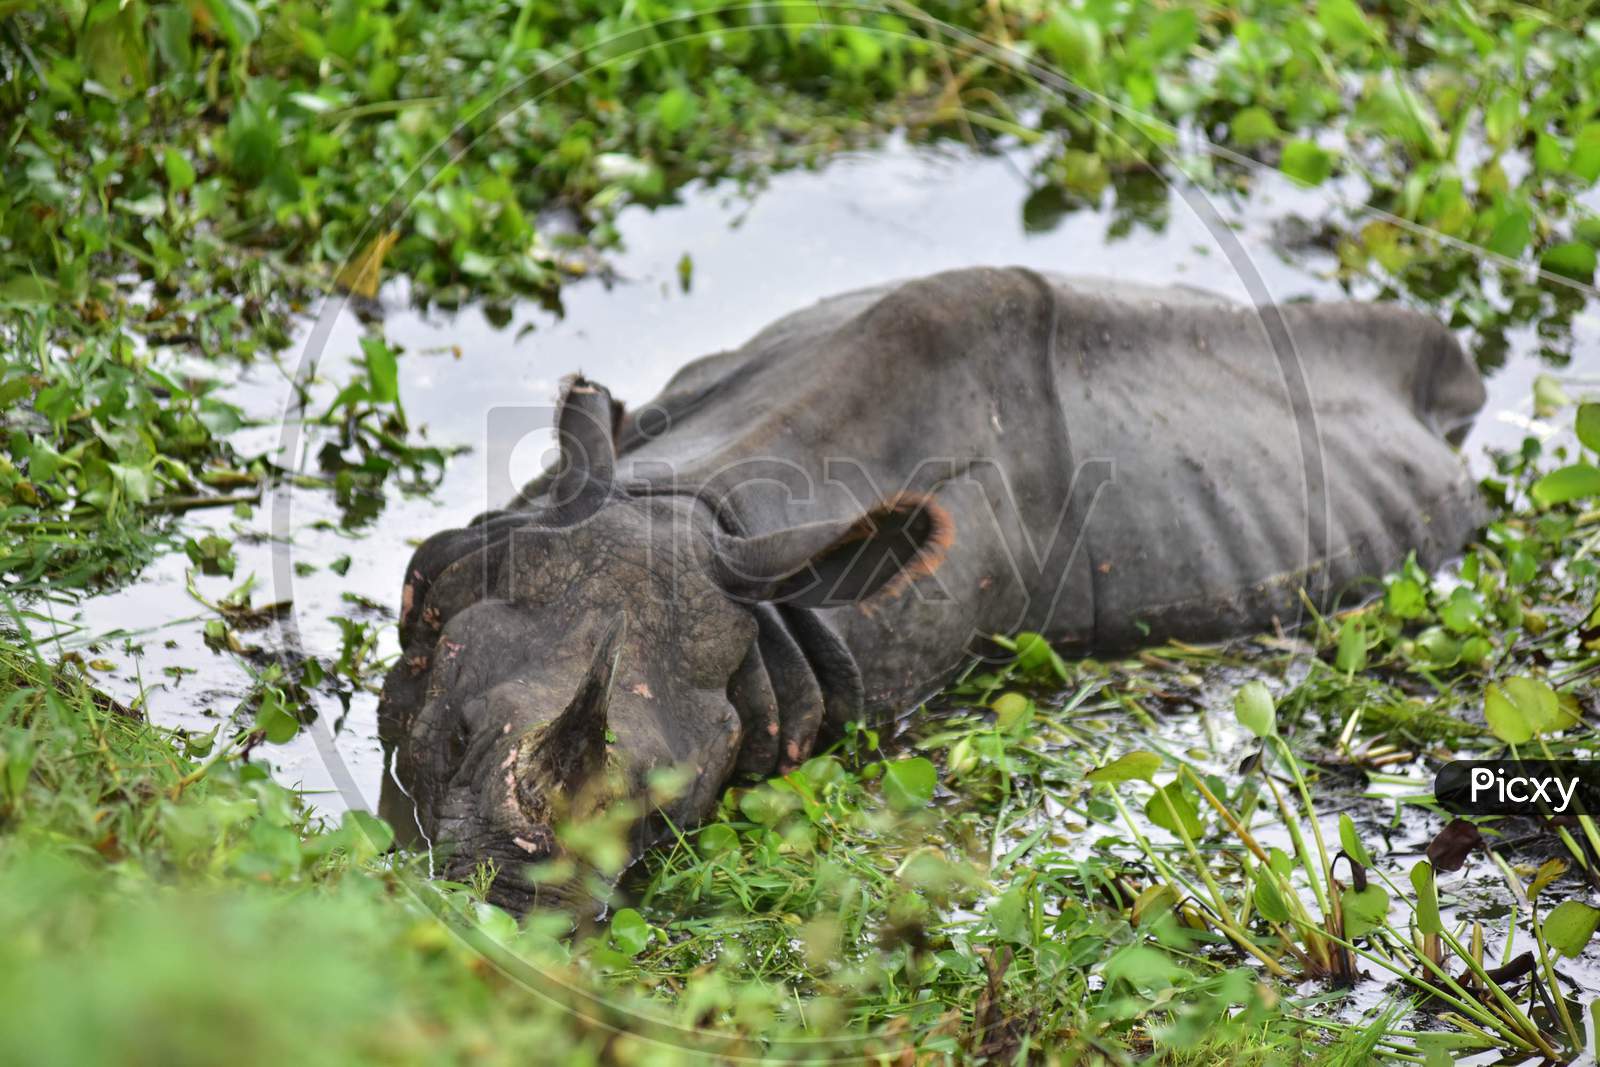 A rhino rests near National Highway 37 after it strayed out of the flood-affected Kaziranga National Park in Nagaon, Assam on July 18, 2020